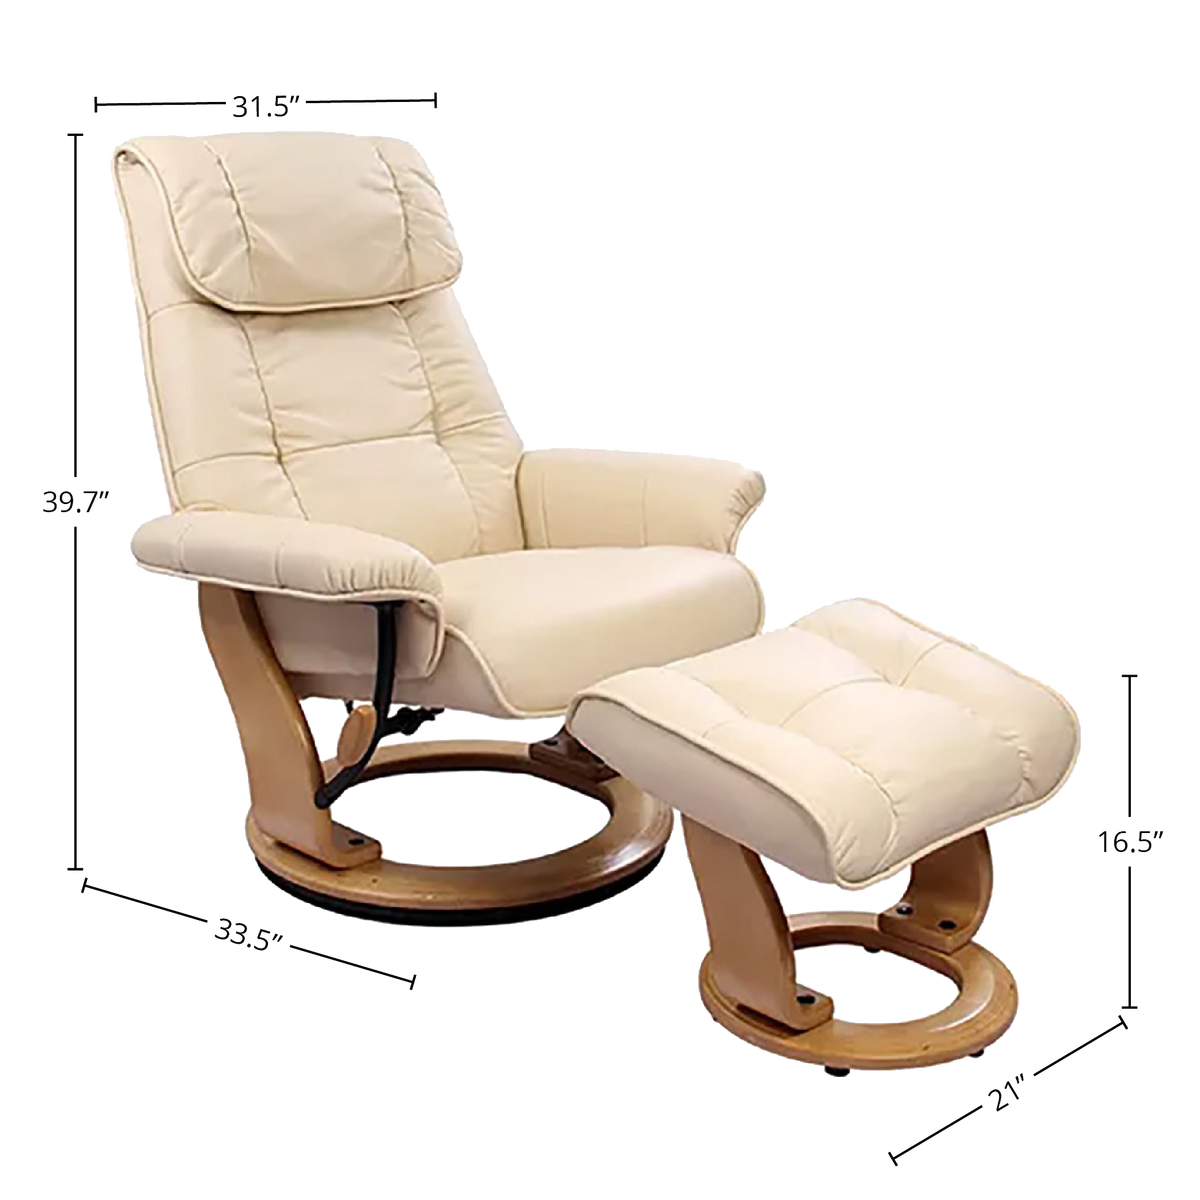 Muscat 360 Leather Swivel Recliner with Ottoman